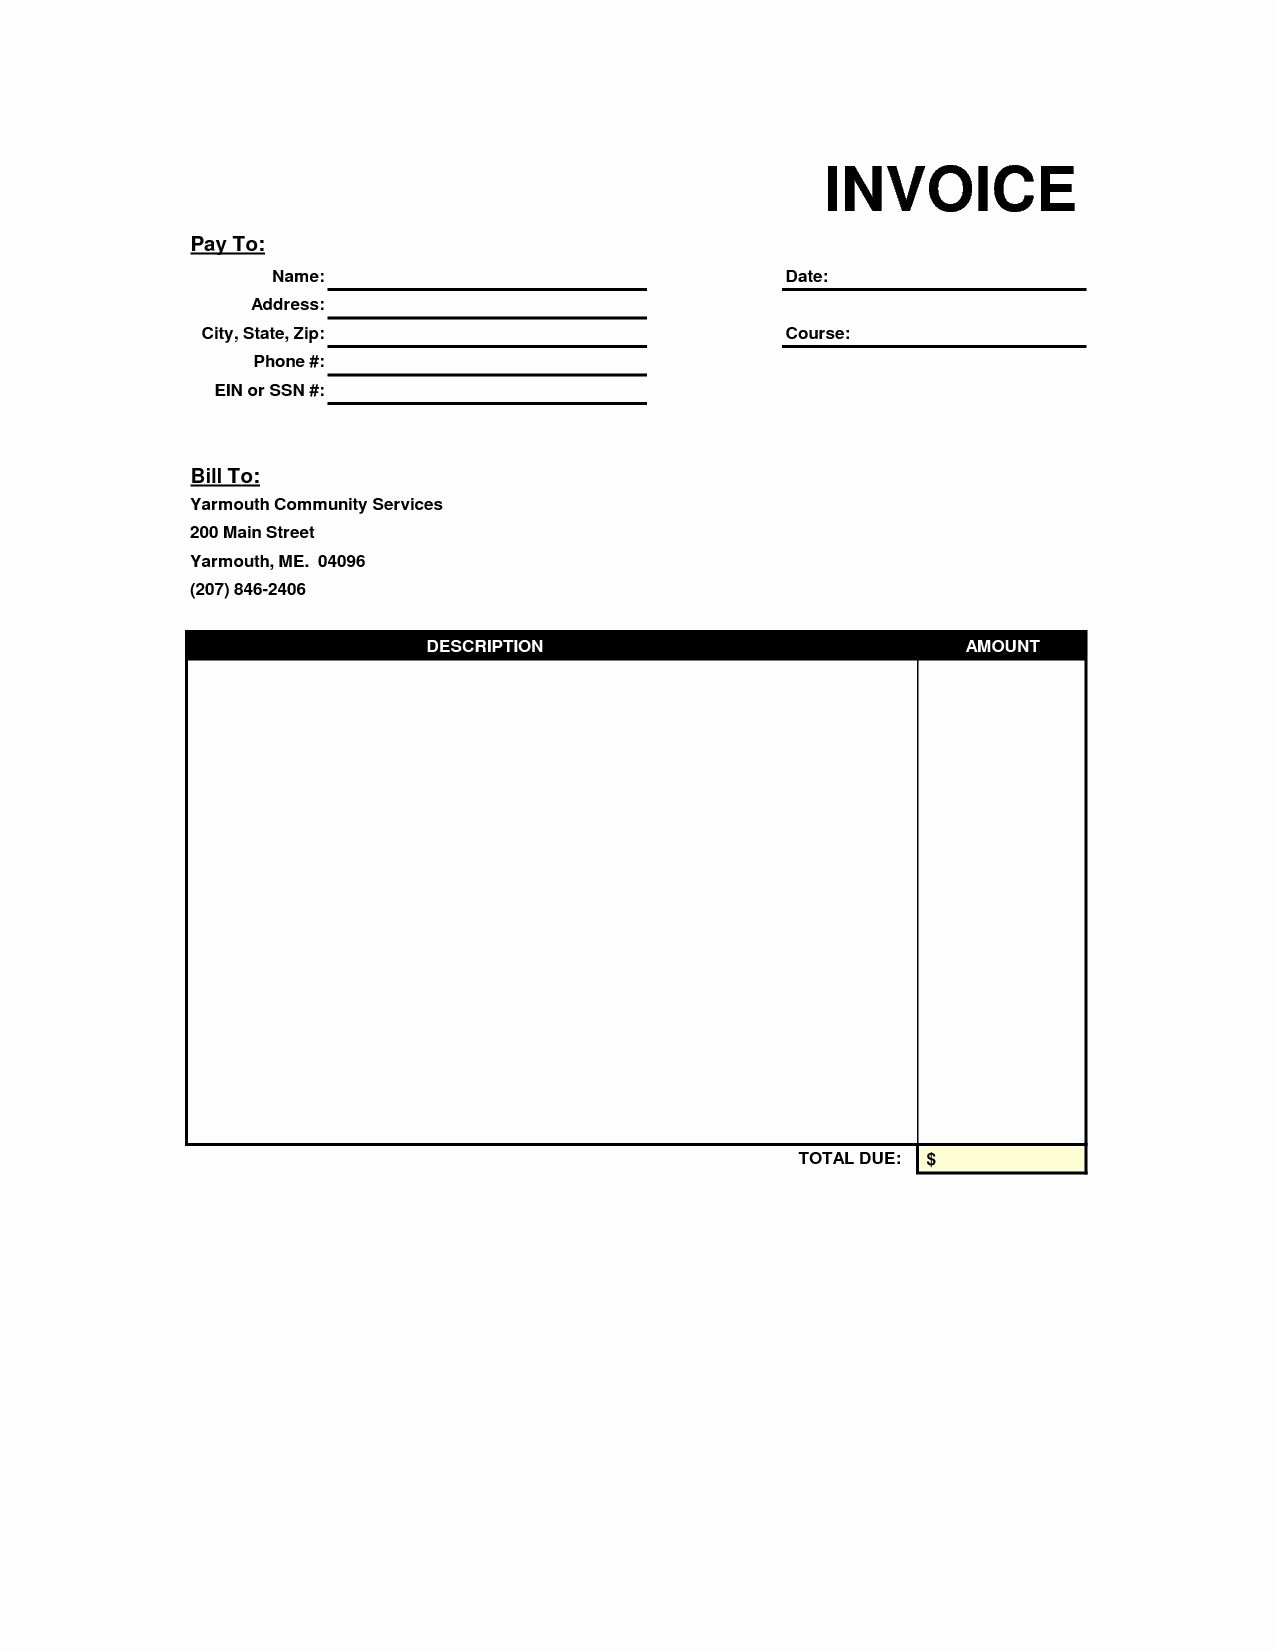 Is An Invoice A Receipt New Blank Copy Of An Invoice Google Recruiter Resume Copy Of